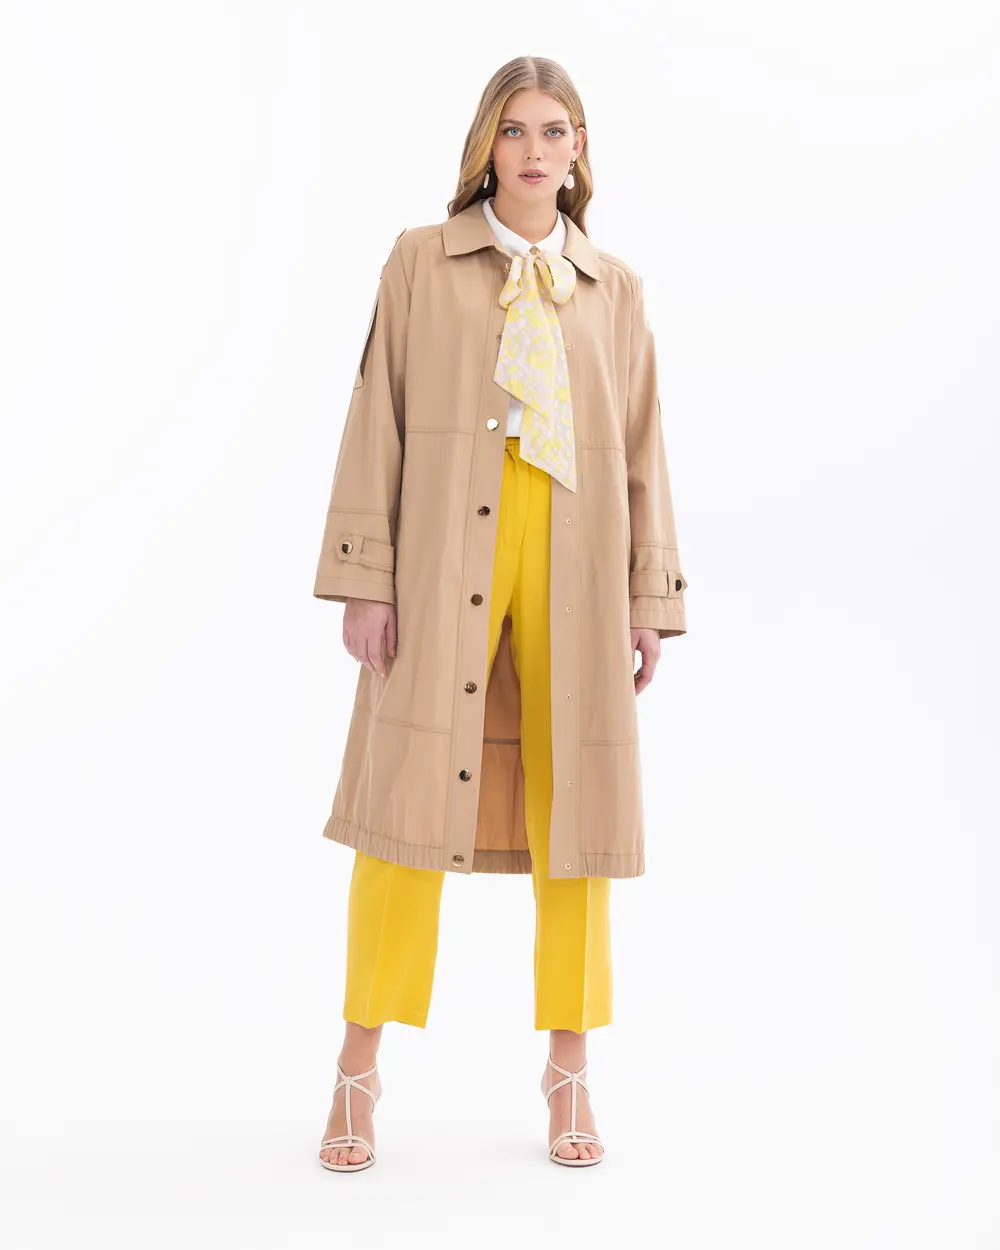 Buttoned Knee-length Trench Coat with Belt